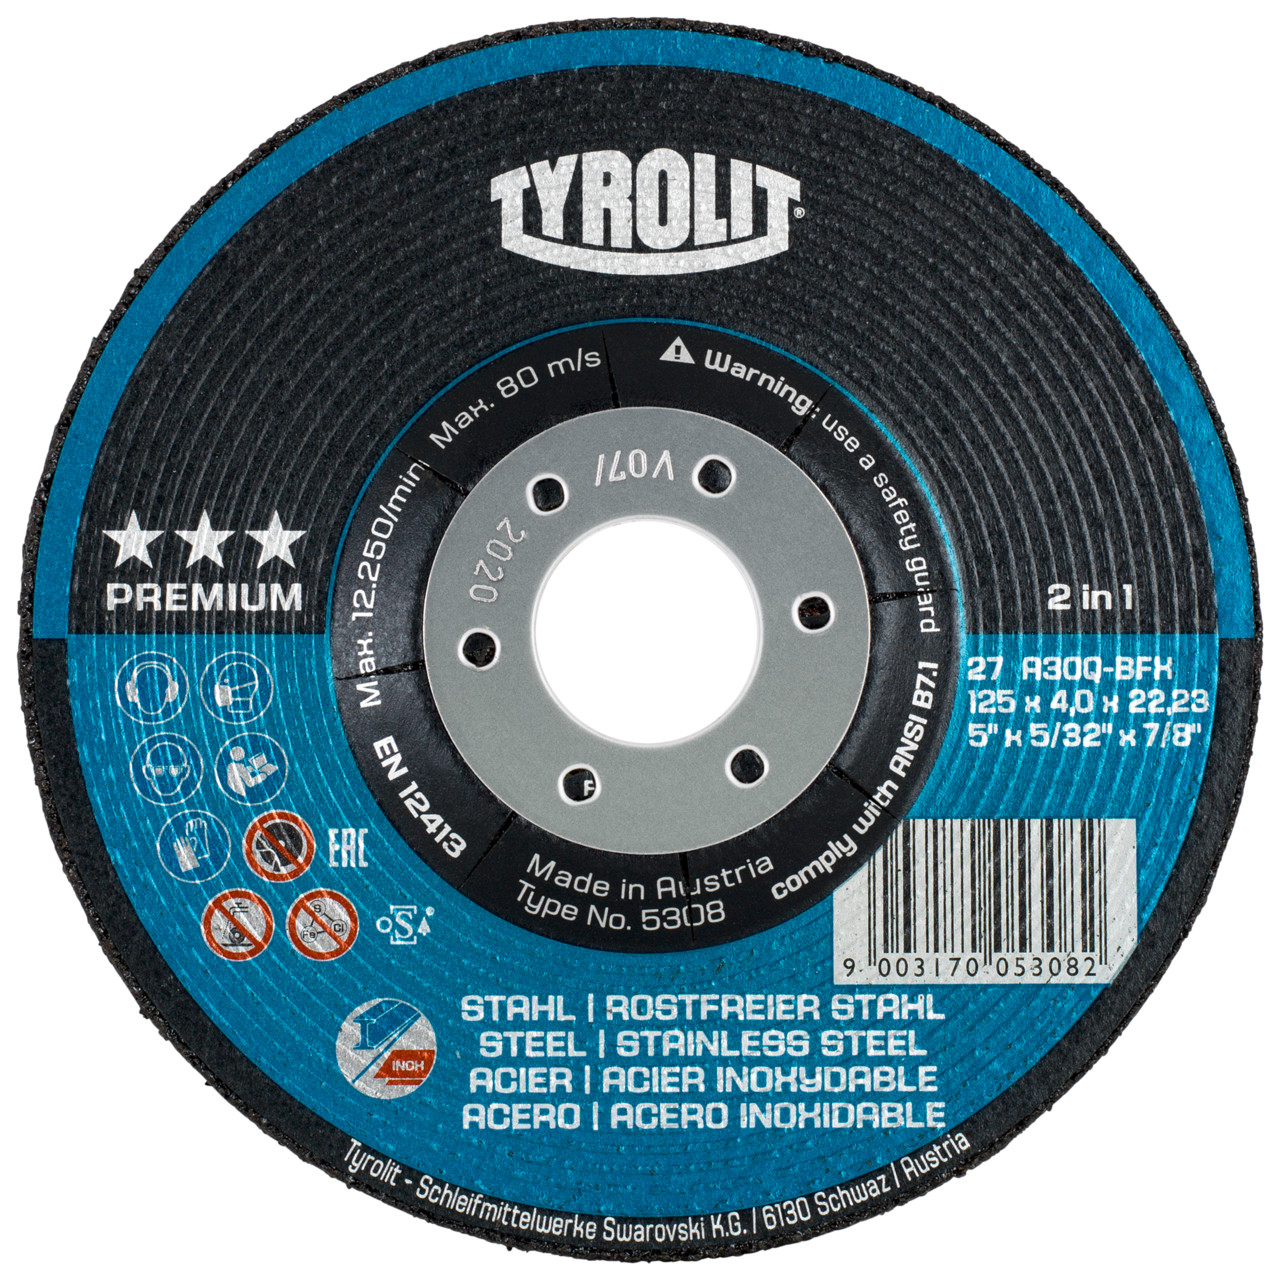 TYROLIT grinding wheel DxUxH 230x4x22.23 2in1 for steel and stainless steel, shape: 27 - offset version, Art. 5406